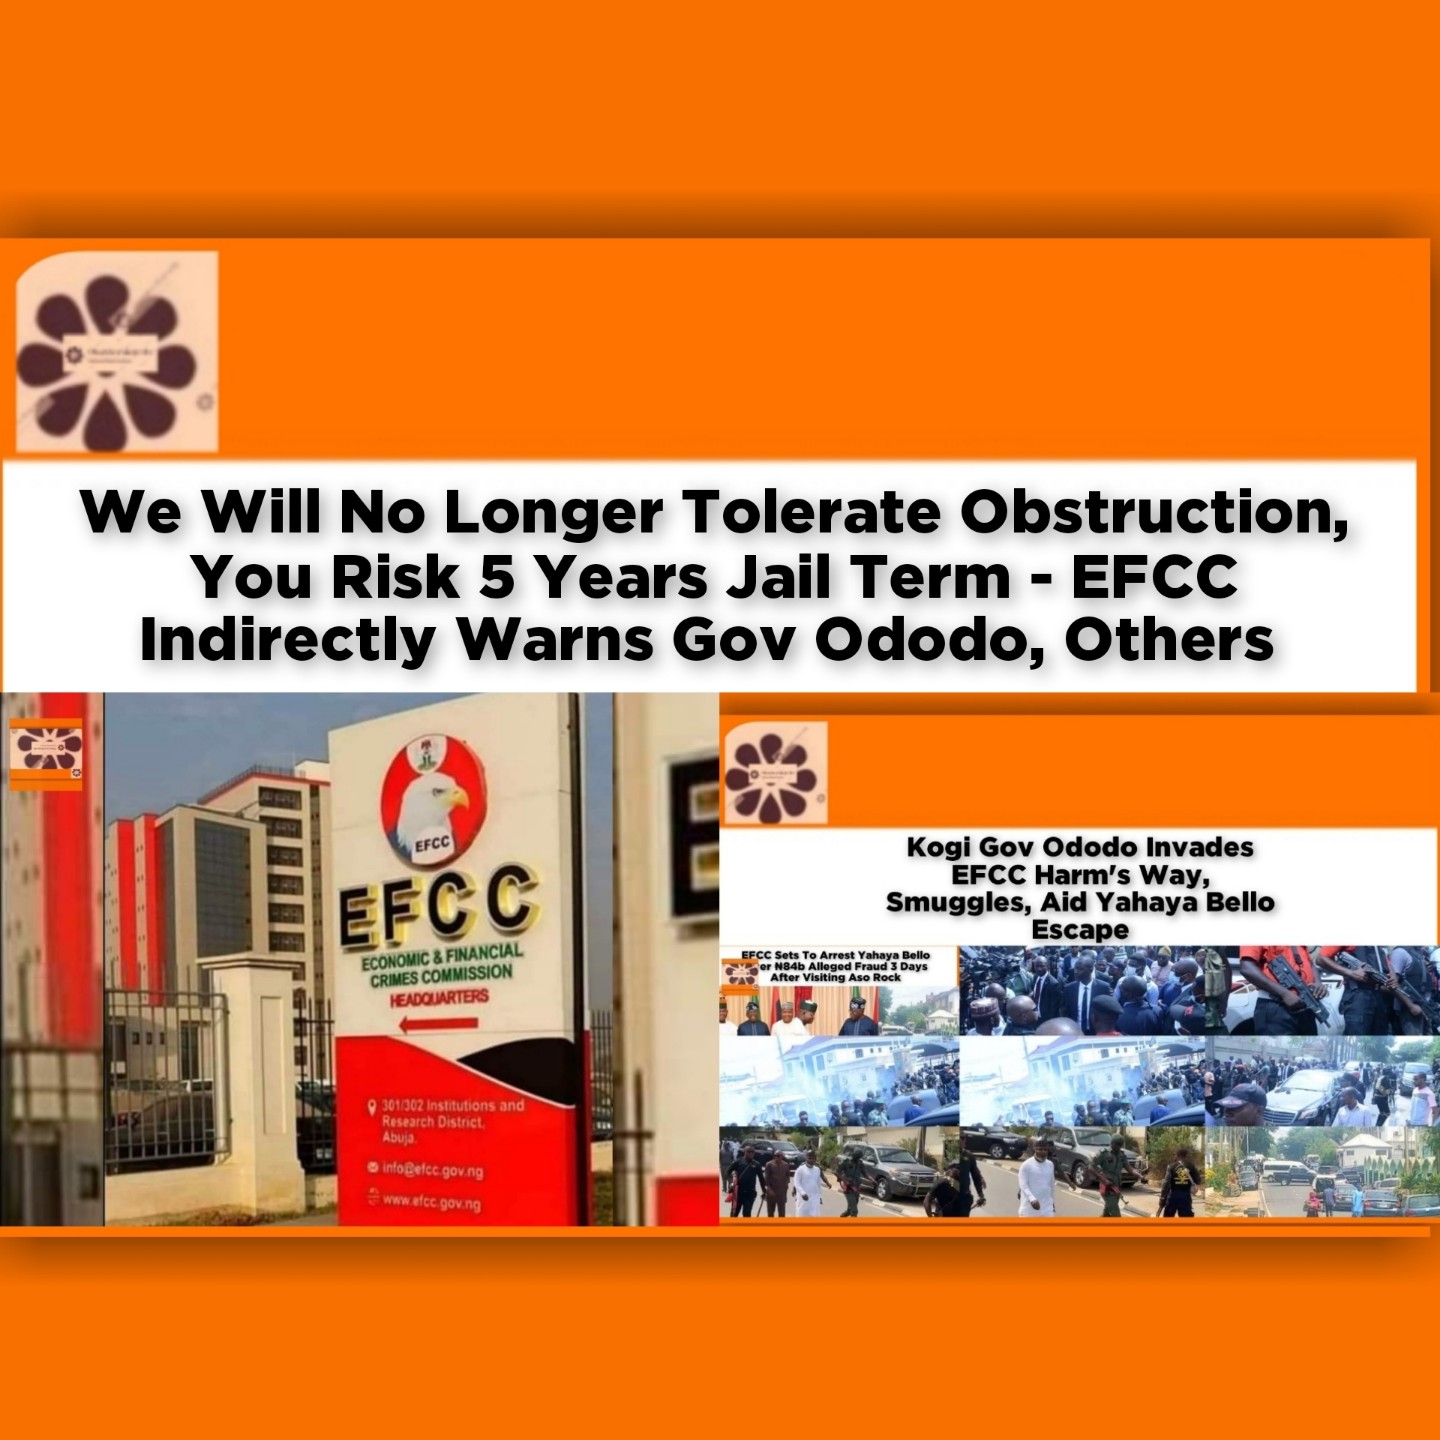 We Will No Longer Tolerate Obstruction, You Risk 5 Years Jail Term - EFCC Indirectly Warns Gov Ododo, Others ~ OsazuwaAkonedo #Biafra